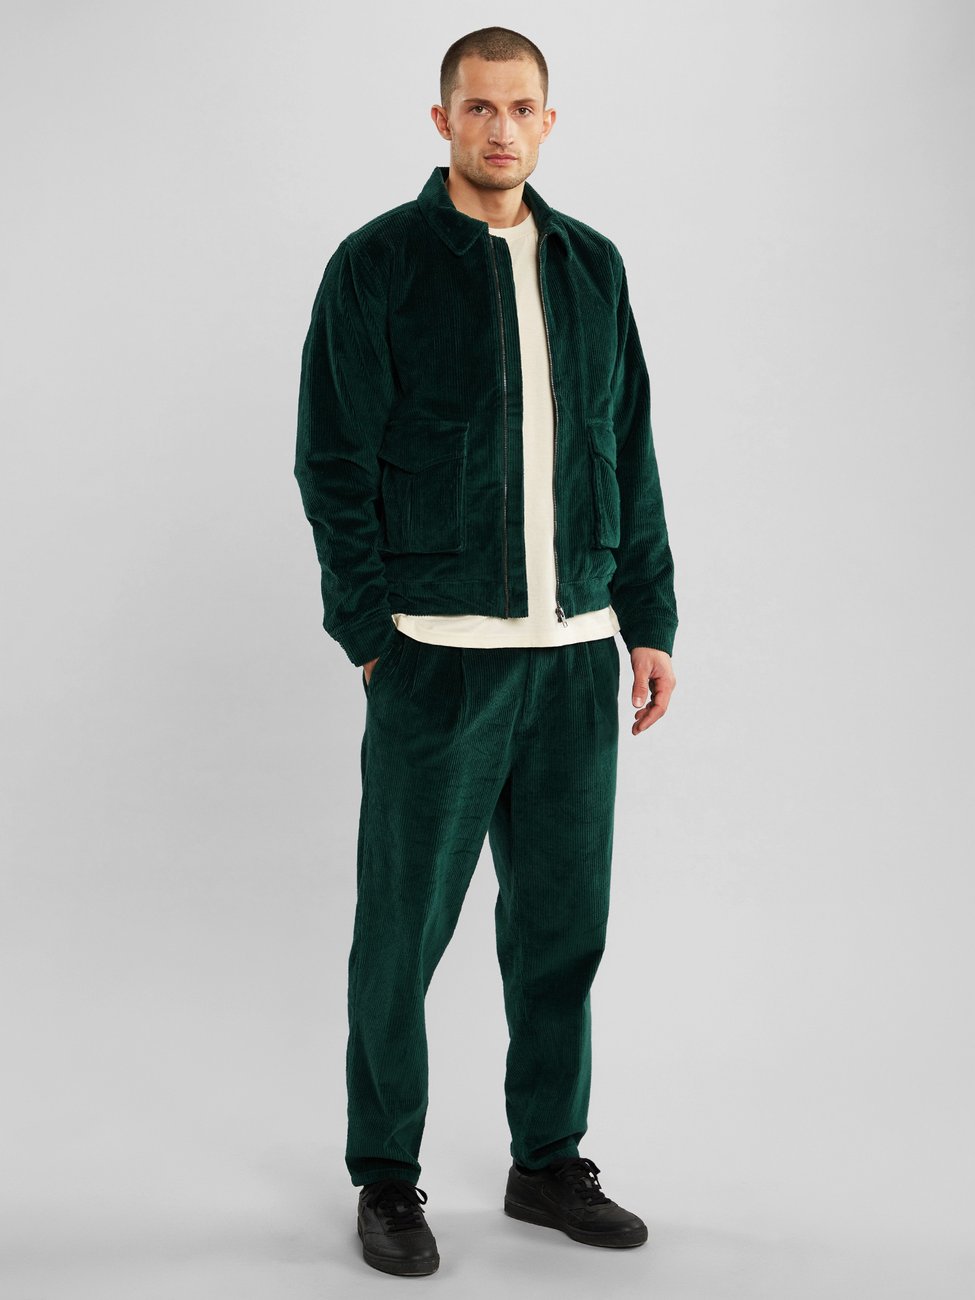 Male model wearing dark green corduroy pants with a matching jacket and a white top underneath from Dedicated